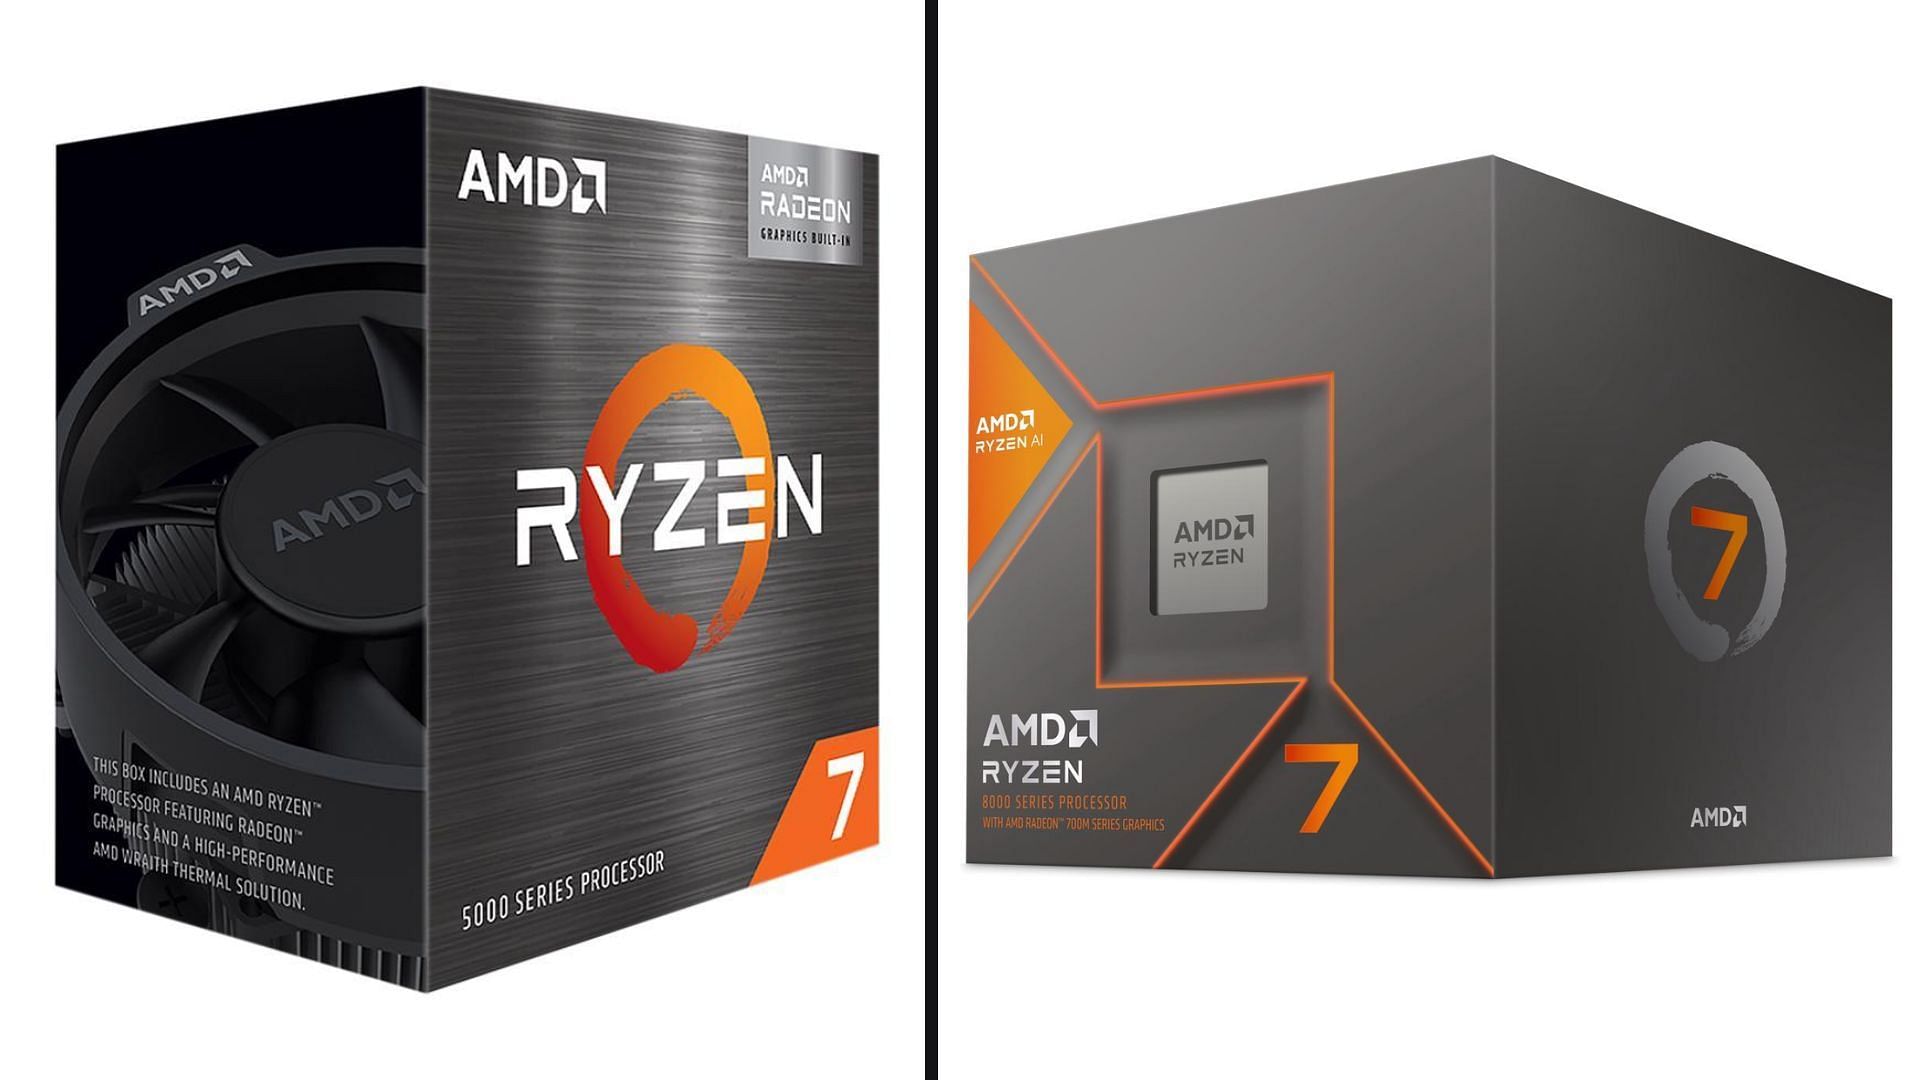 The Ryzen 7 5700G and Ryzen 7 8700G are some of the most powerful APUs today (Image via Newegg)